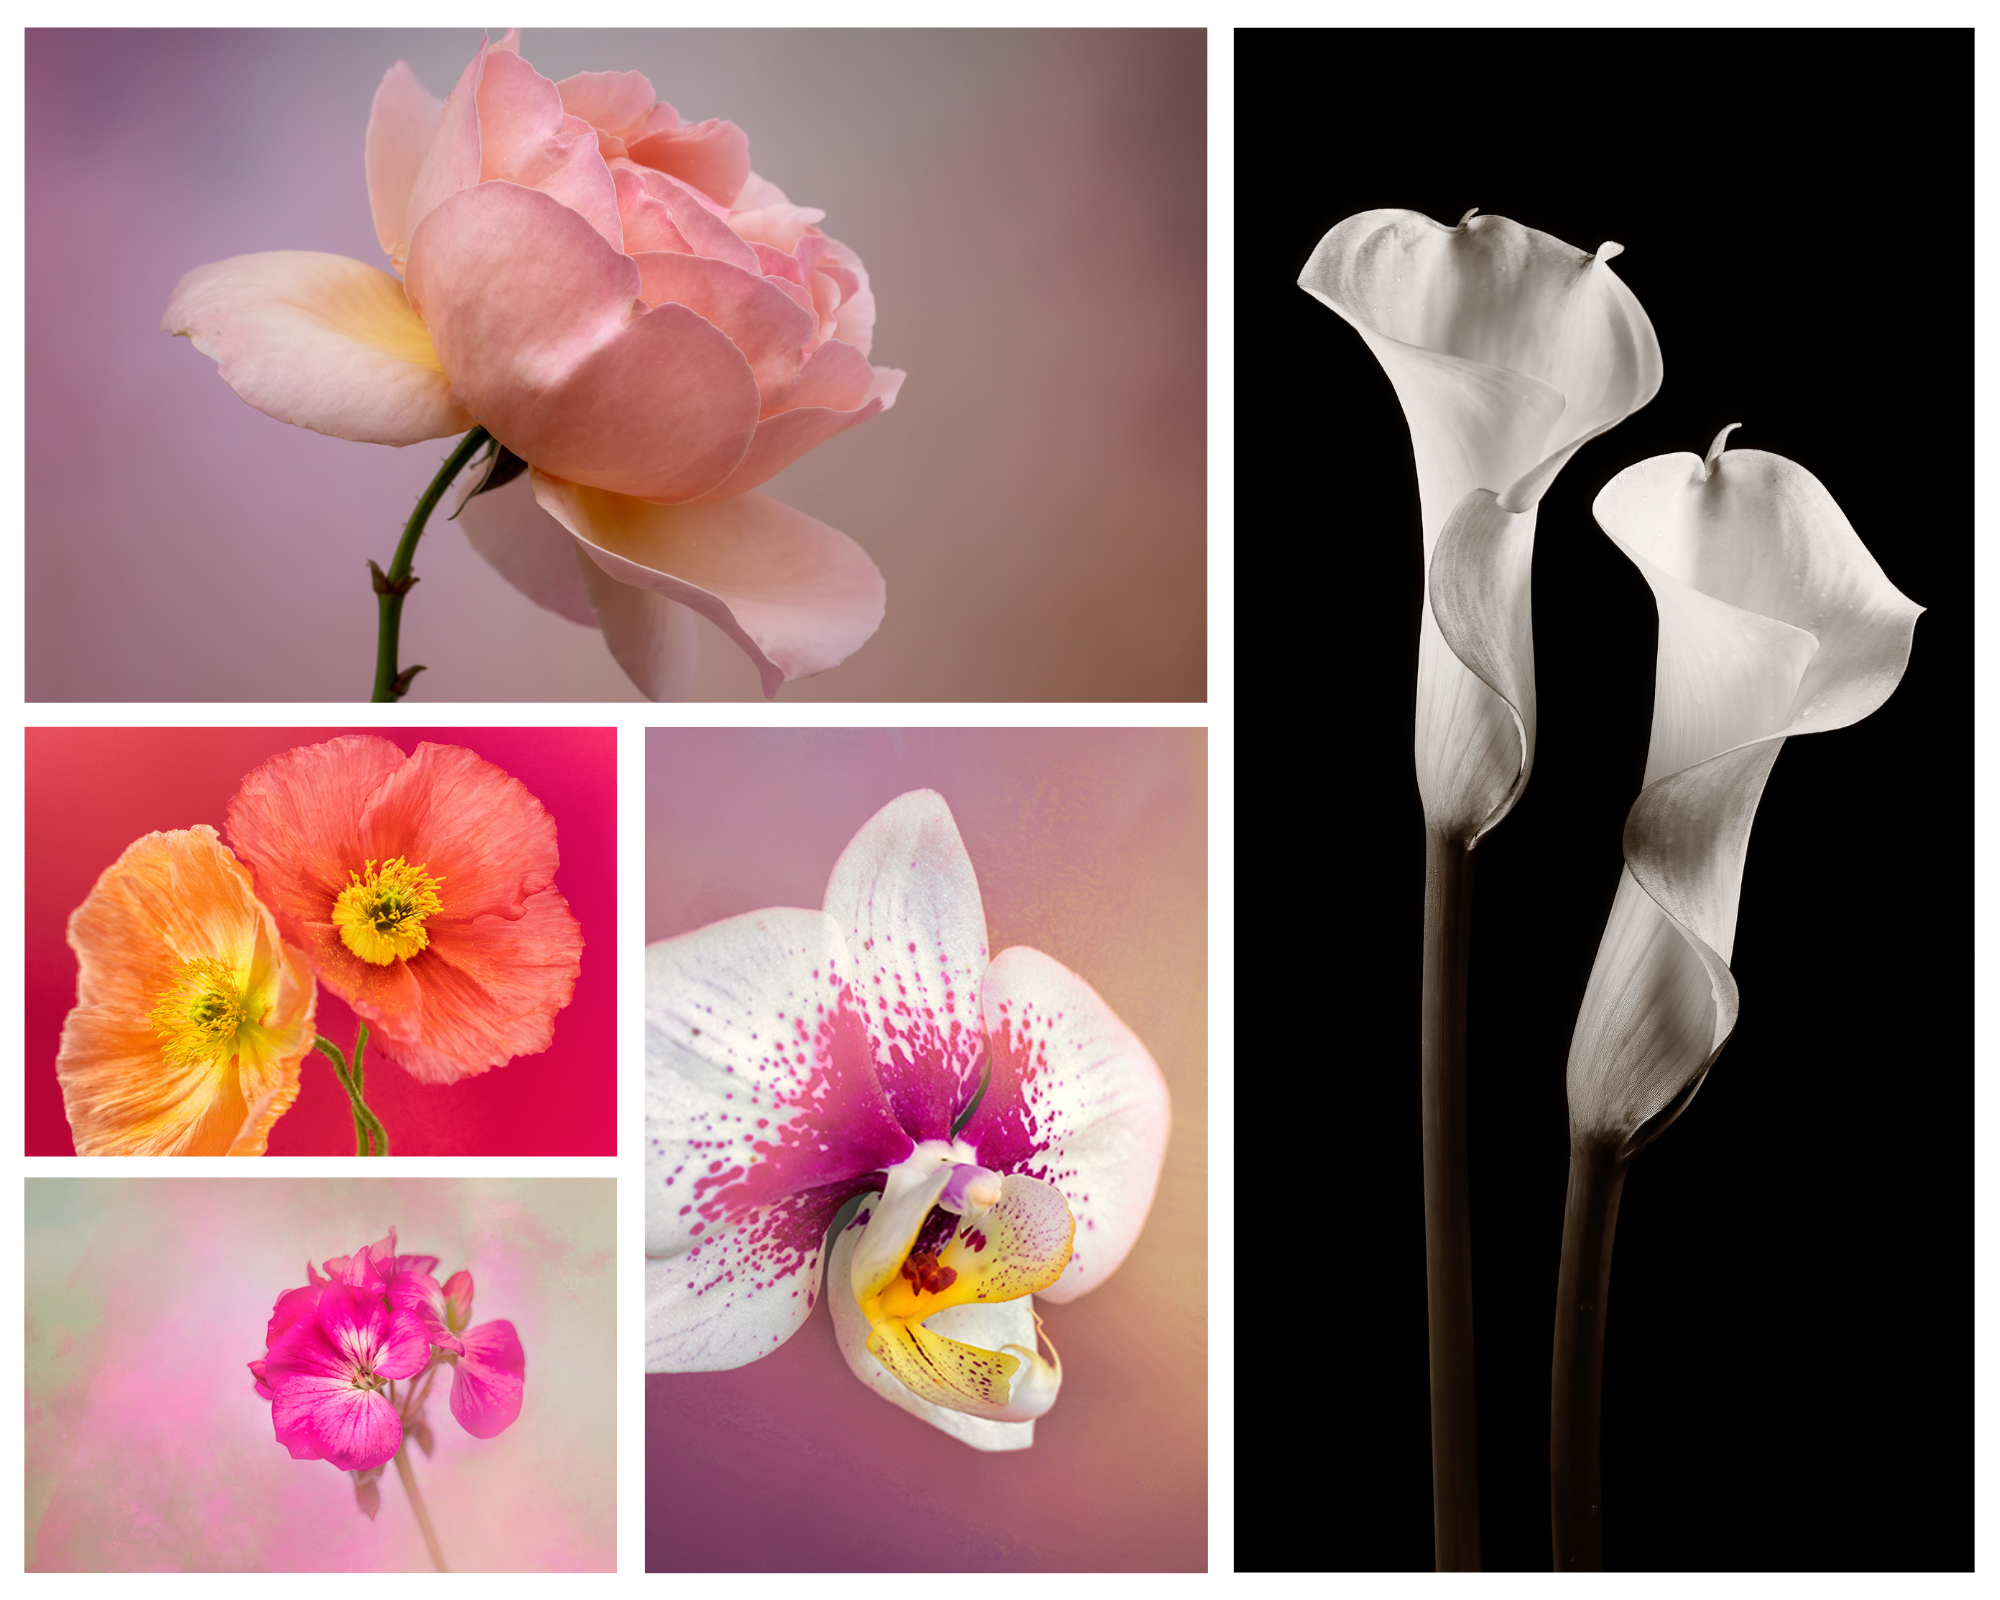 Flower Portraits In The Home Studio - Flower Photography Workshop